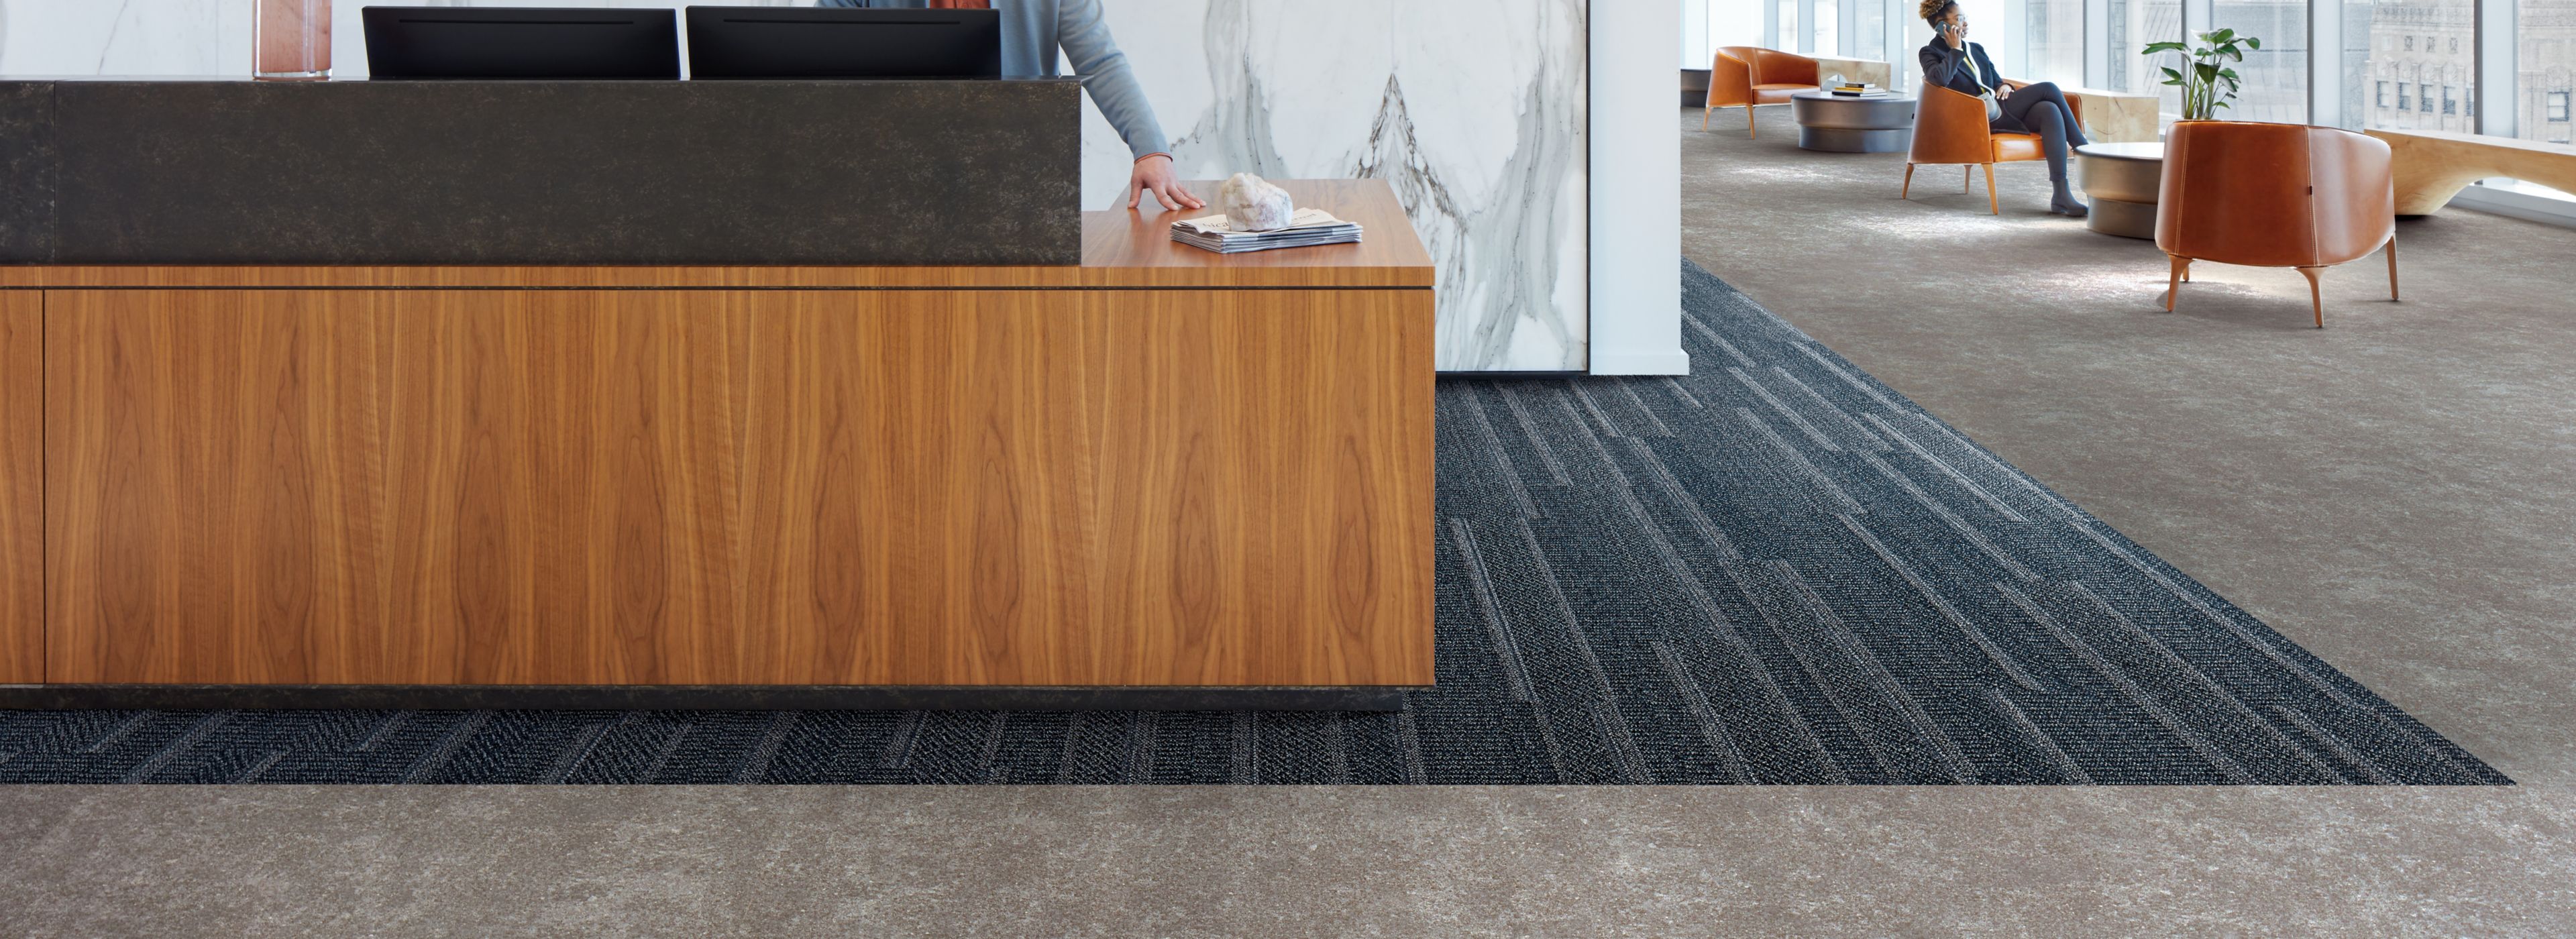 Interface Simple Sash plank carpet tile and Walk of Life LVT in a corporate lobby area with front desk  numéro d’image 1